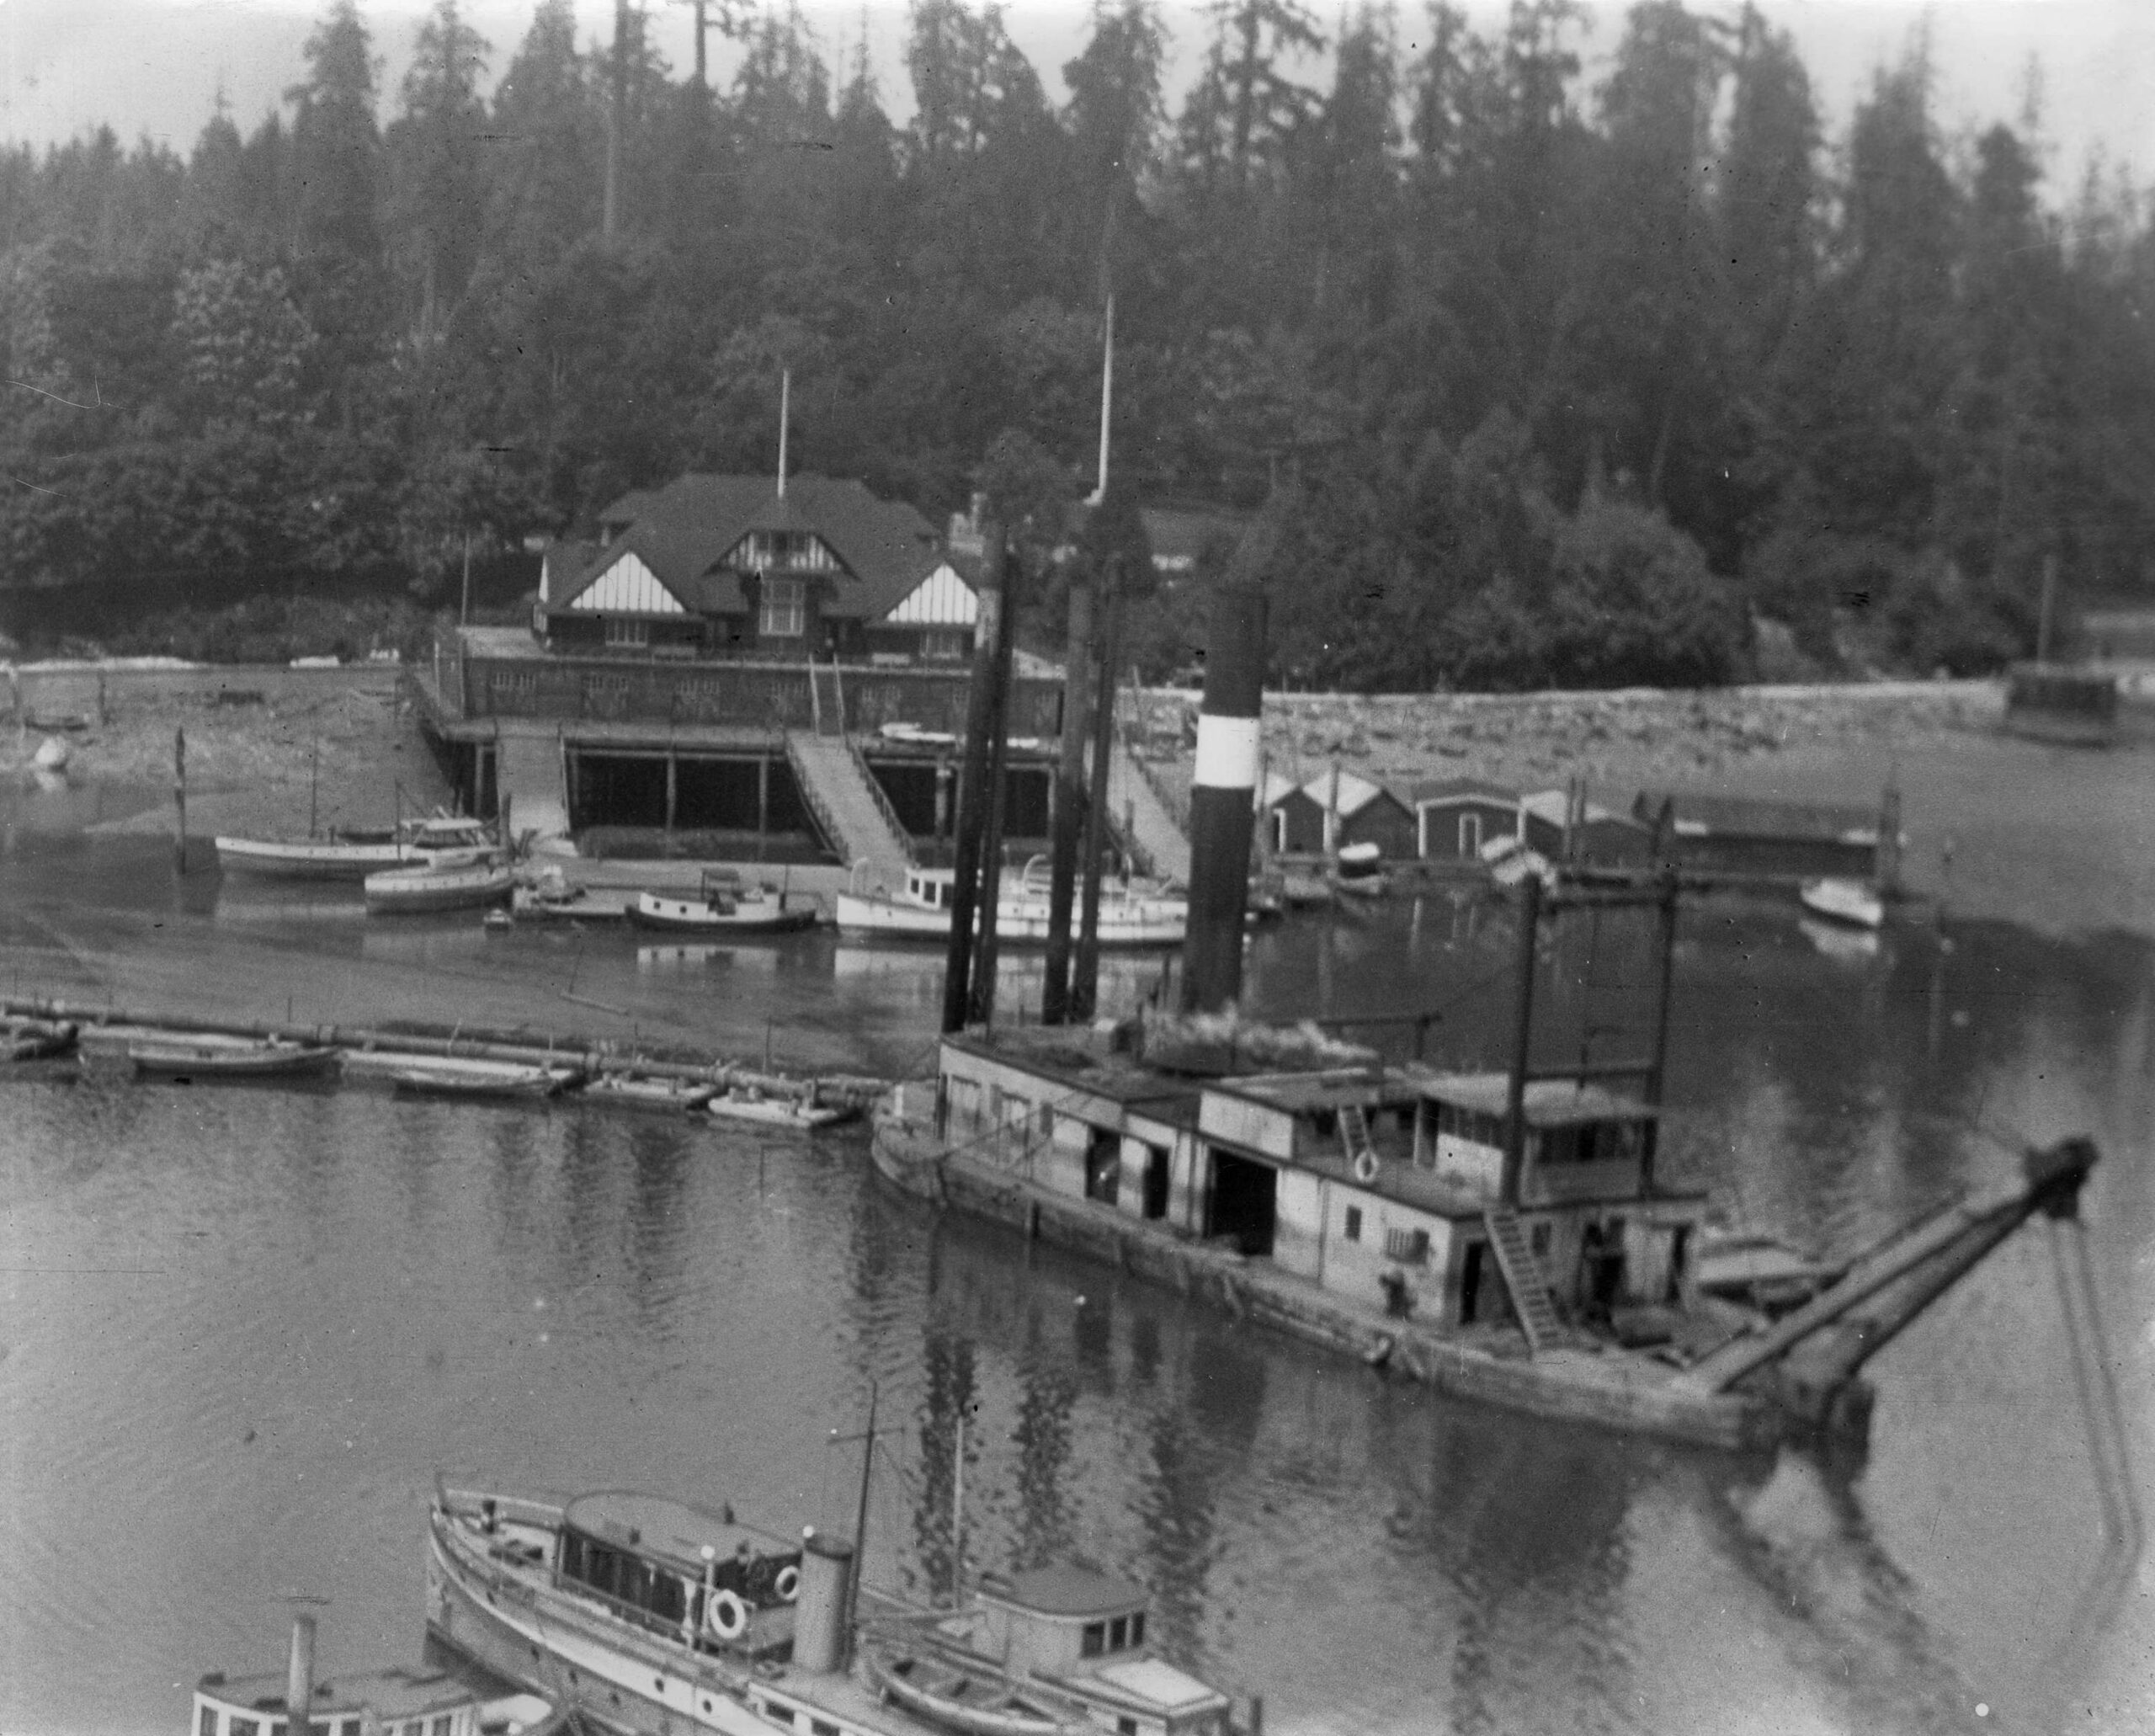 Dredging for the constructions of the Stanley Park causeway, between 1937 and 1938. Reference code: AM1376-: CVA 476-1